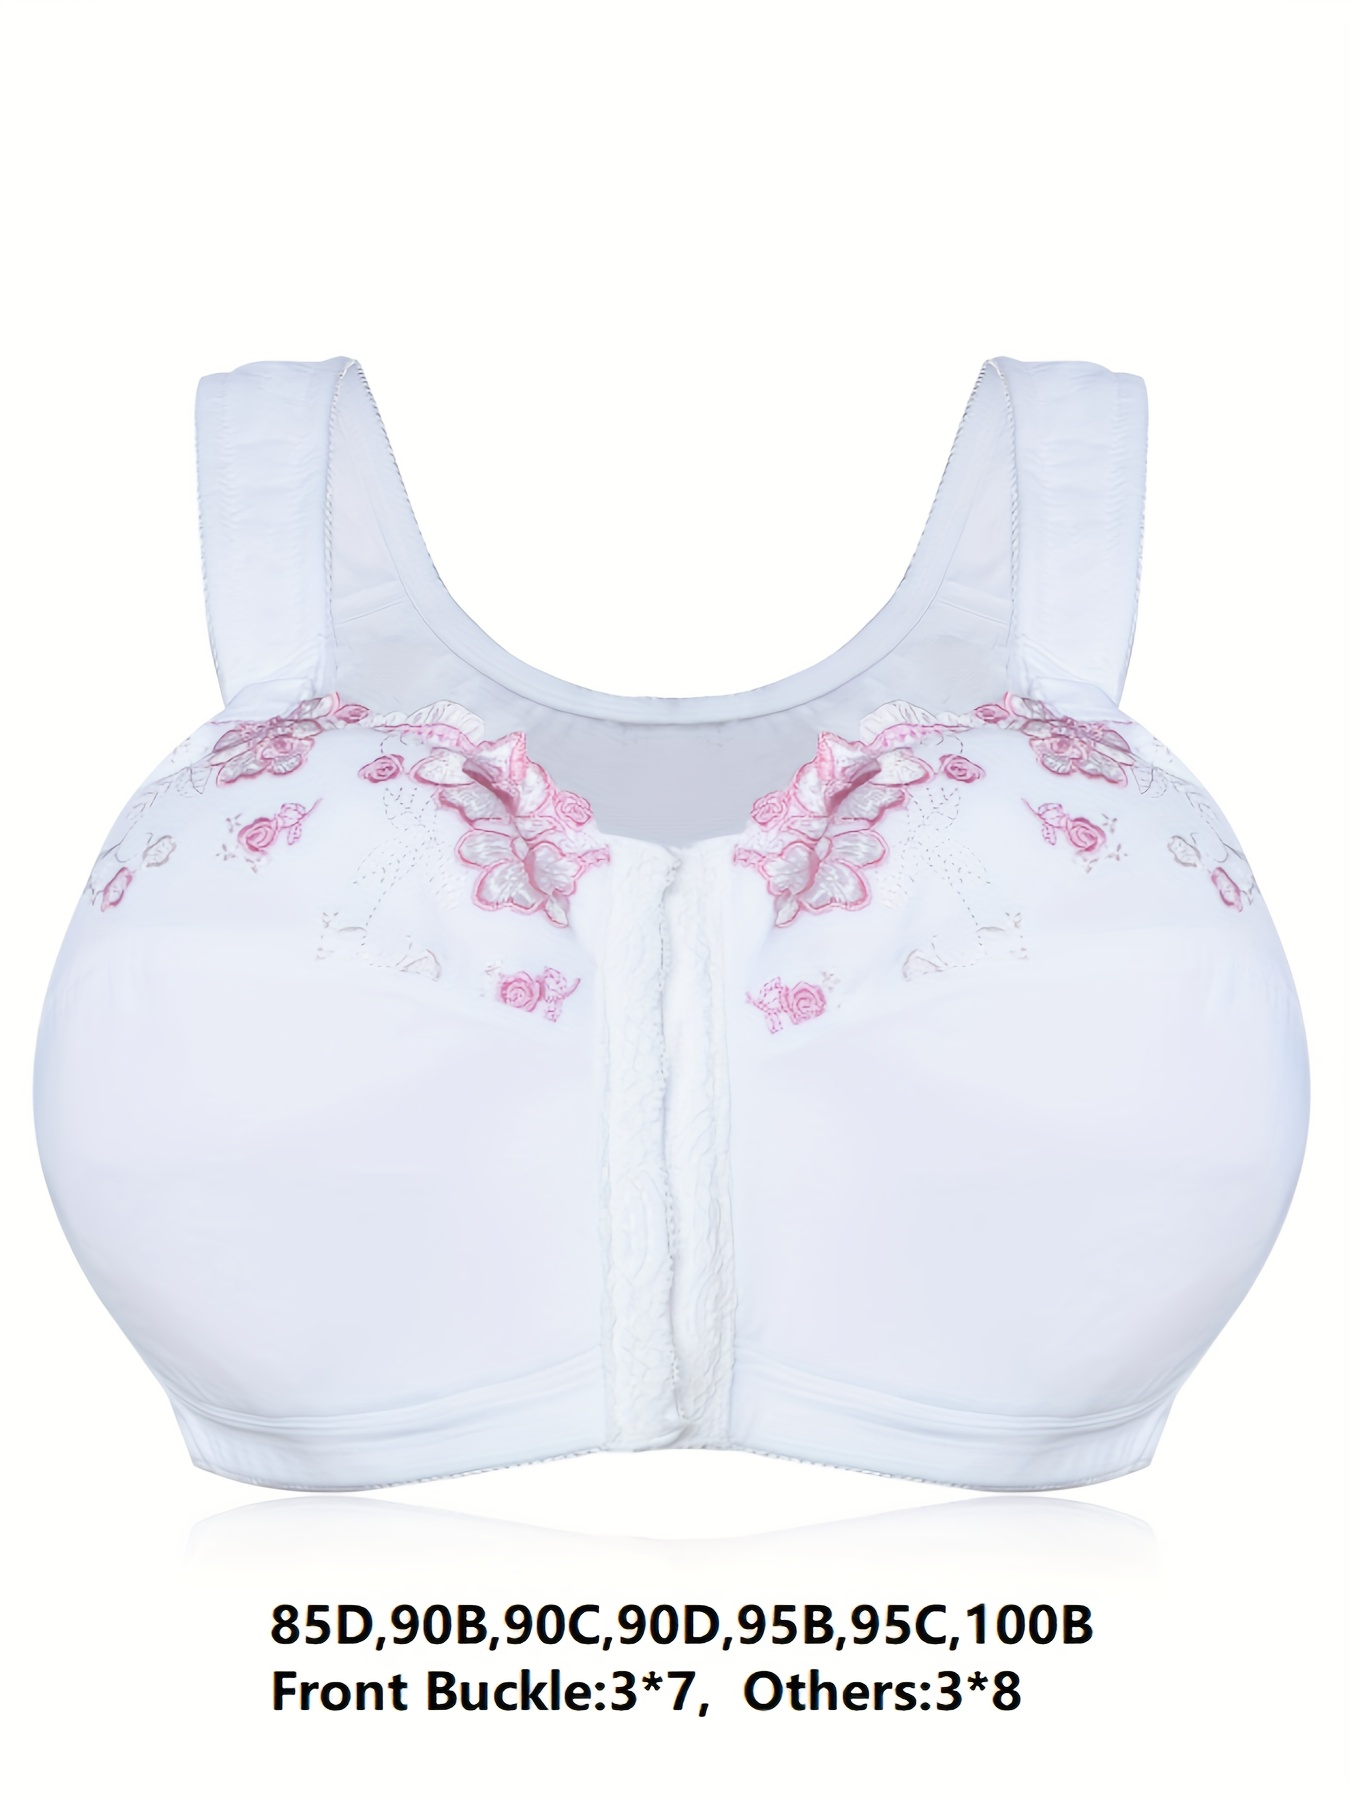 Women's Floral Embroidery Full Coverage Cotton Lining Bra Plus Size Wireless  Unlined Mastectomy bra 34 36 38 40 42 44 B C D DD E F G